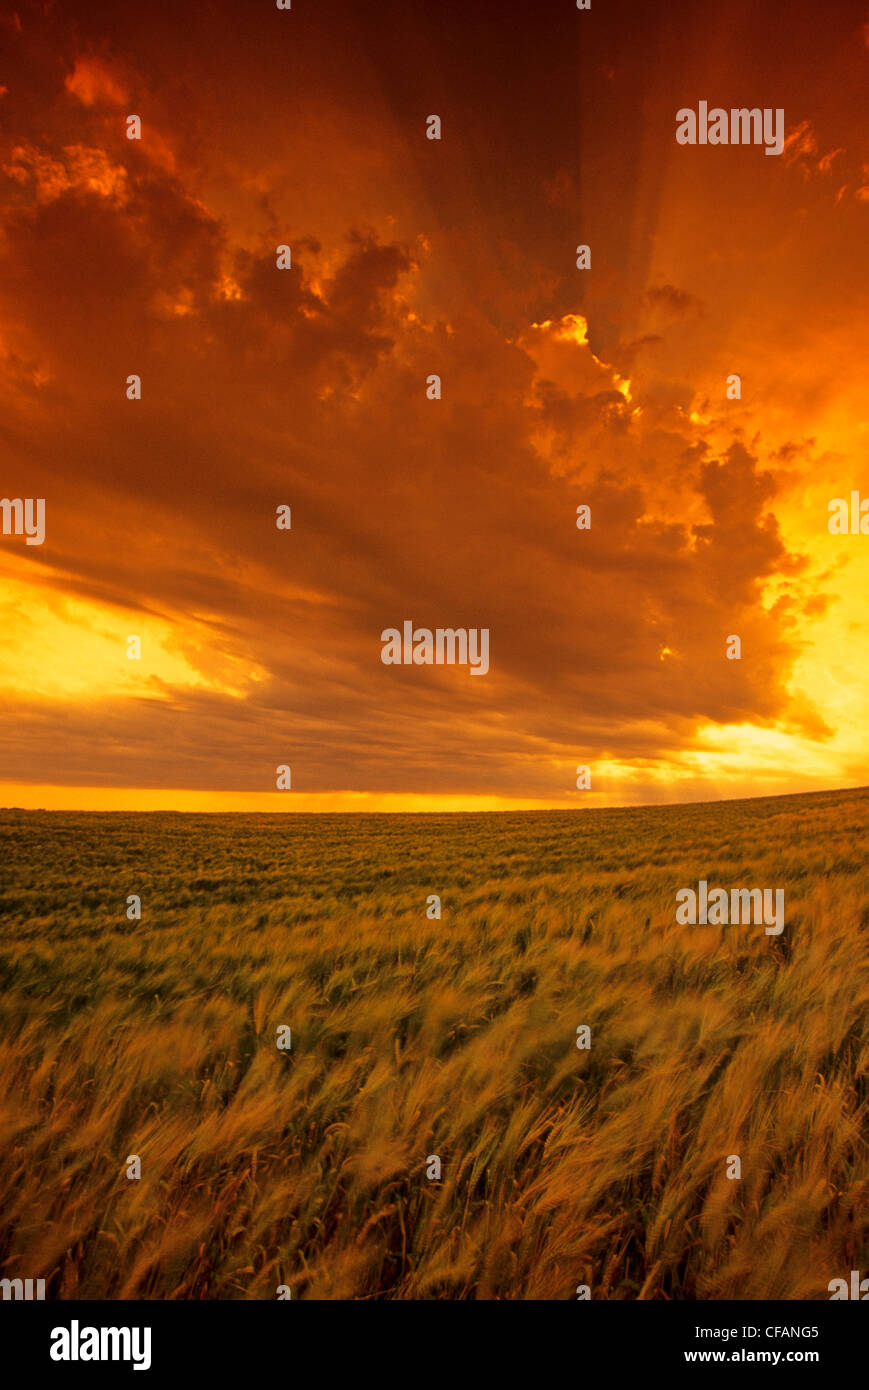 Wind blown barley crop and dramatic sunset sky with developing cumulonimbus clouds, Tiger Hills, Manitoba, Canada Stock Photo